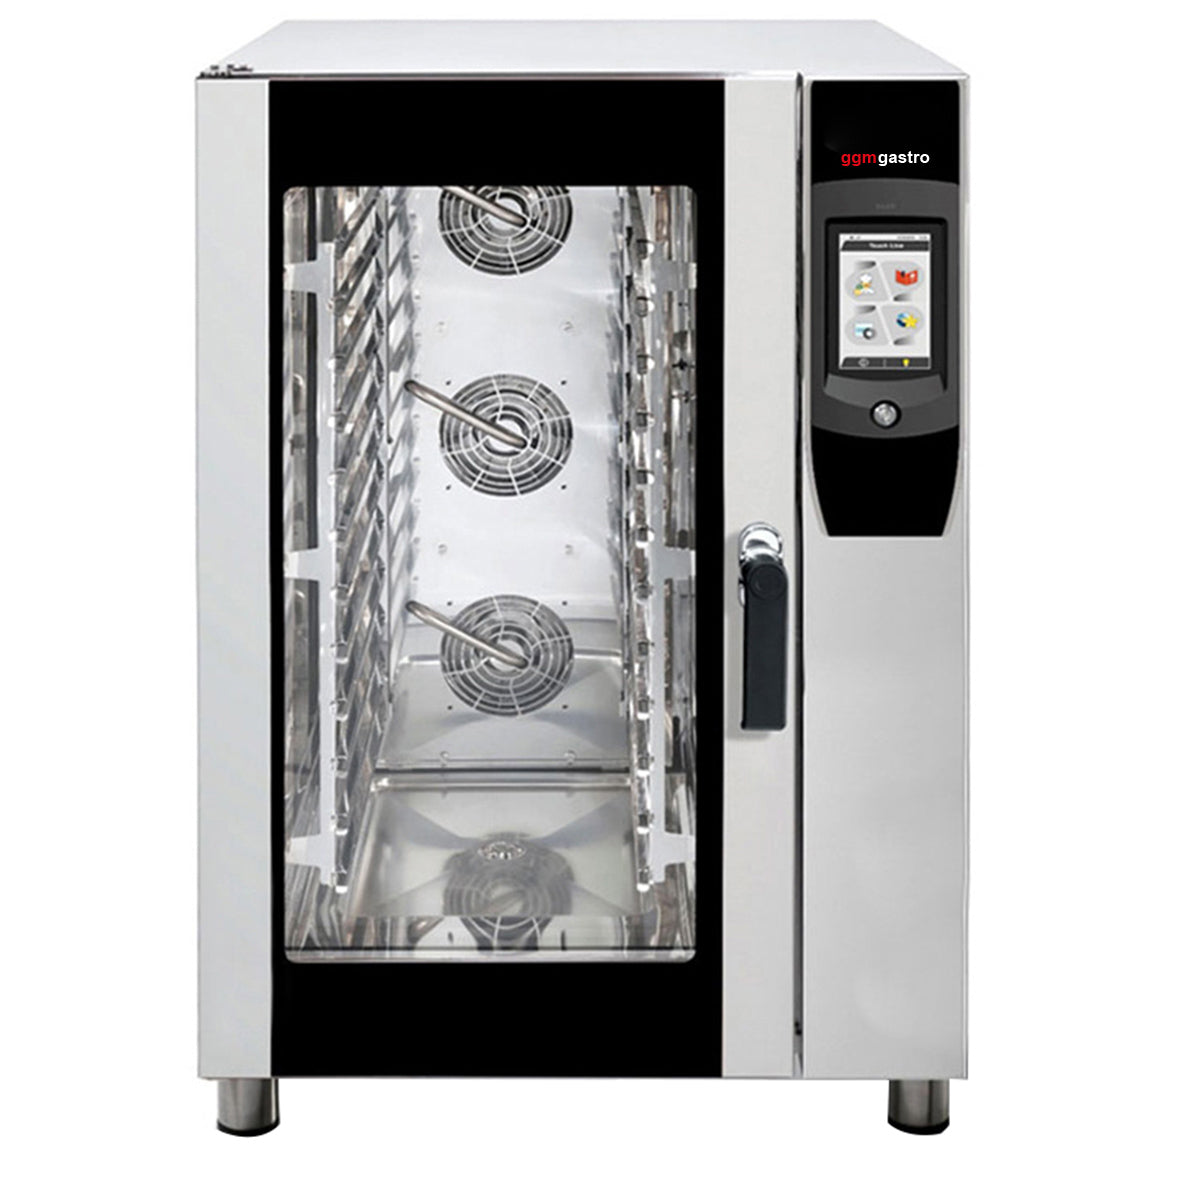 Digital convection oven - 12x GN 1/1 - incl. self-cleaning function